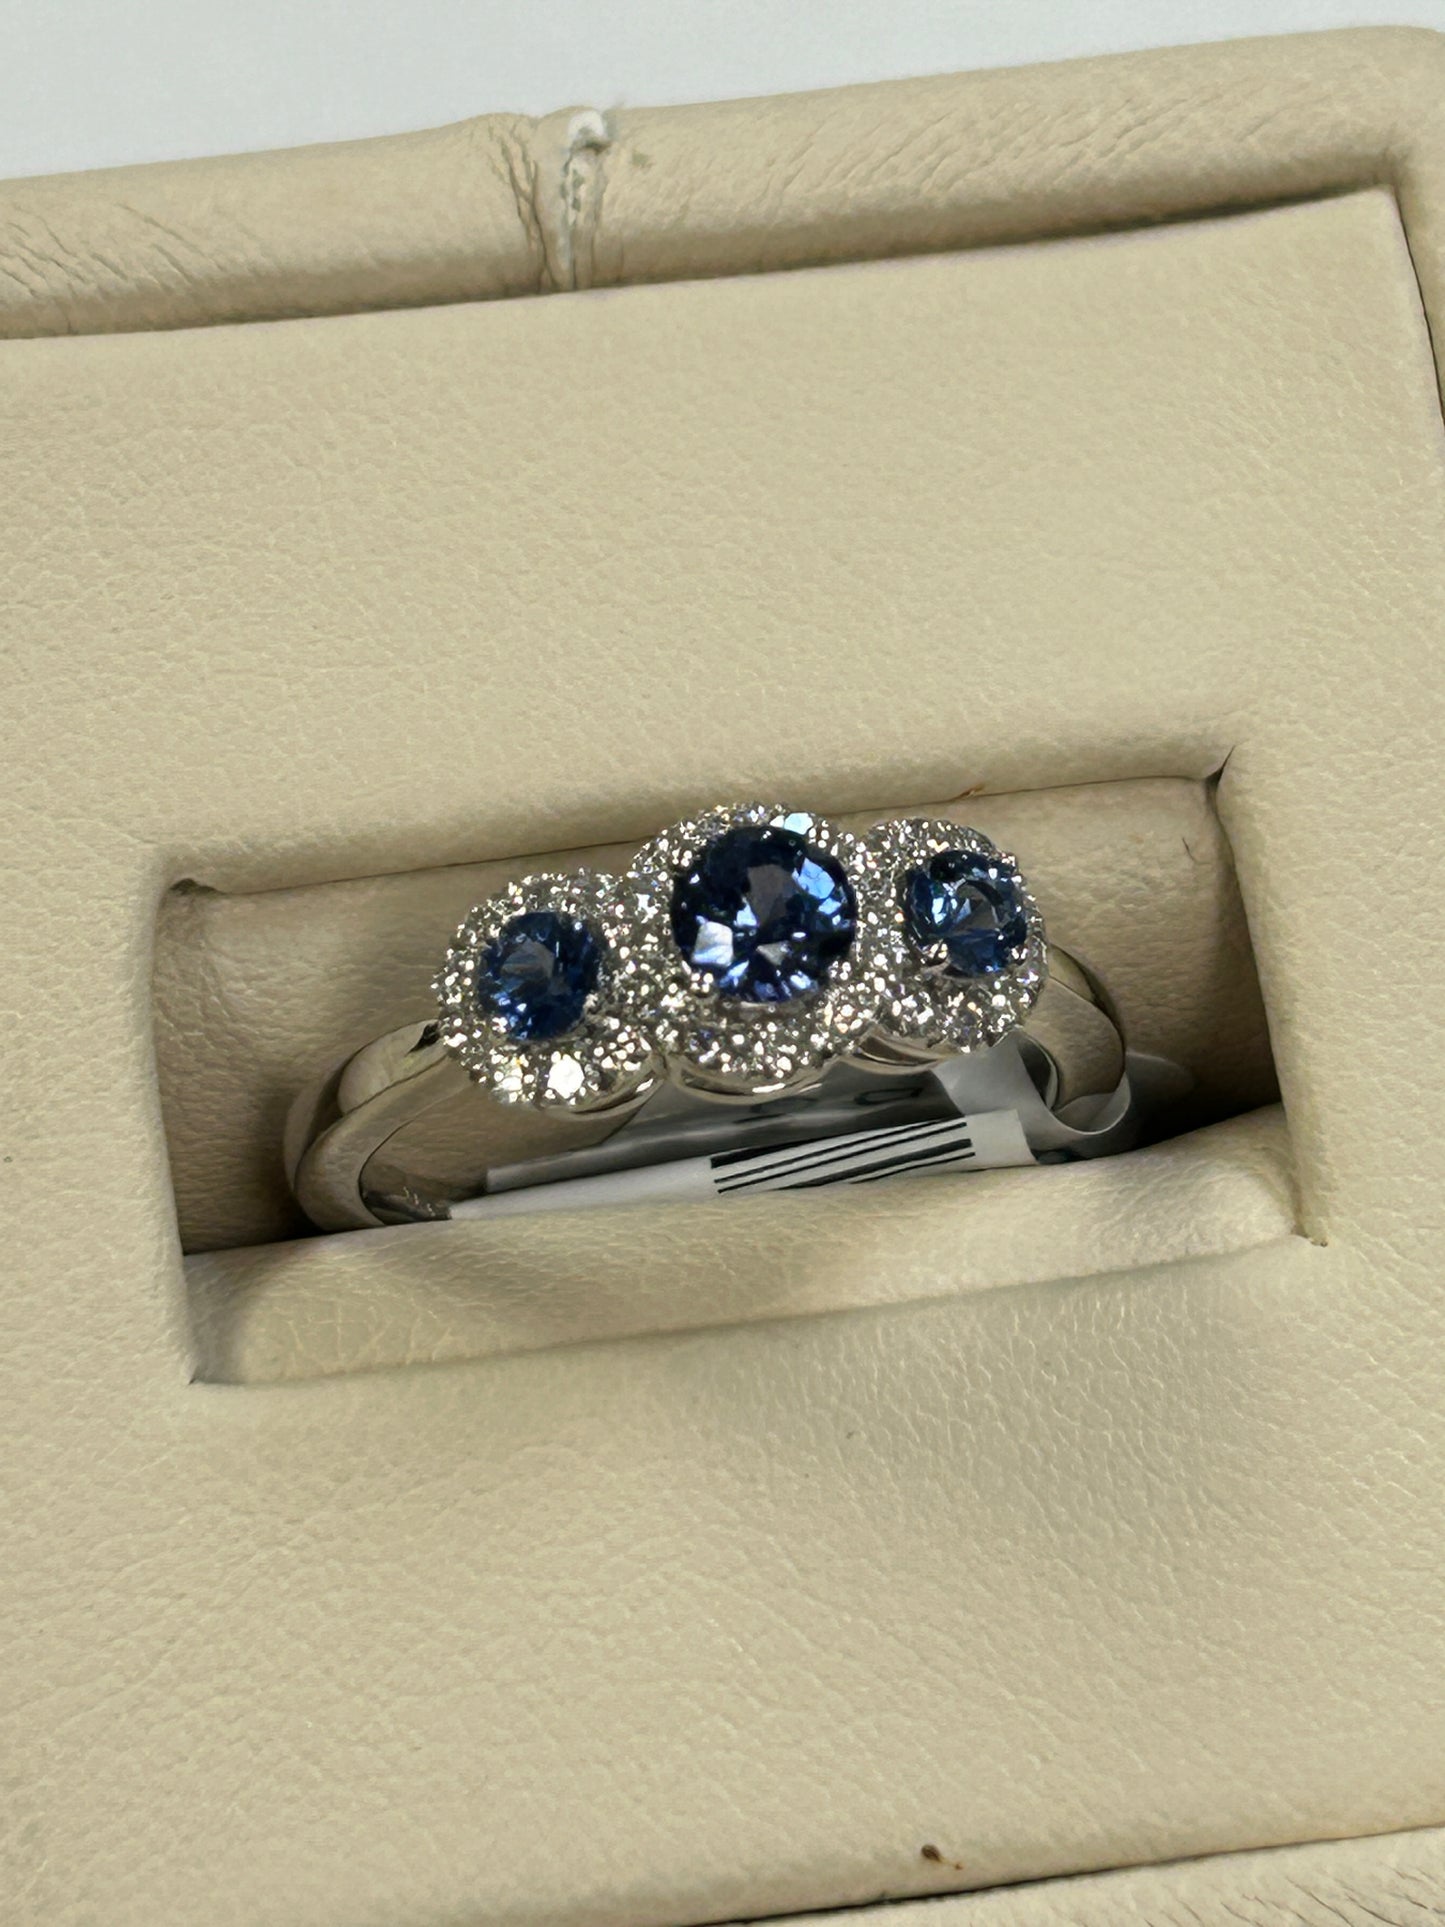 14K White Gold Diamond and Sapphire Ring FRG001820AWDBS